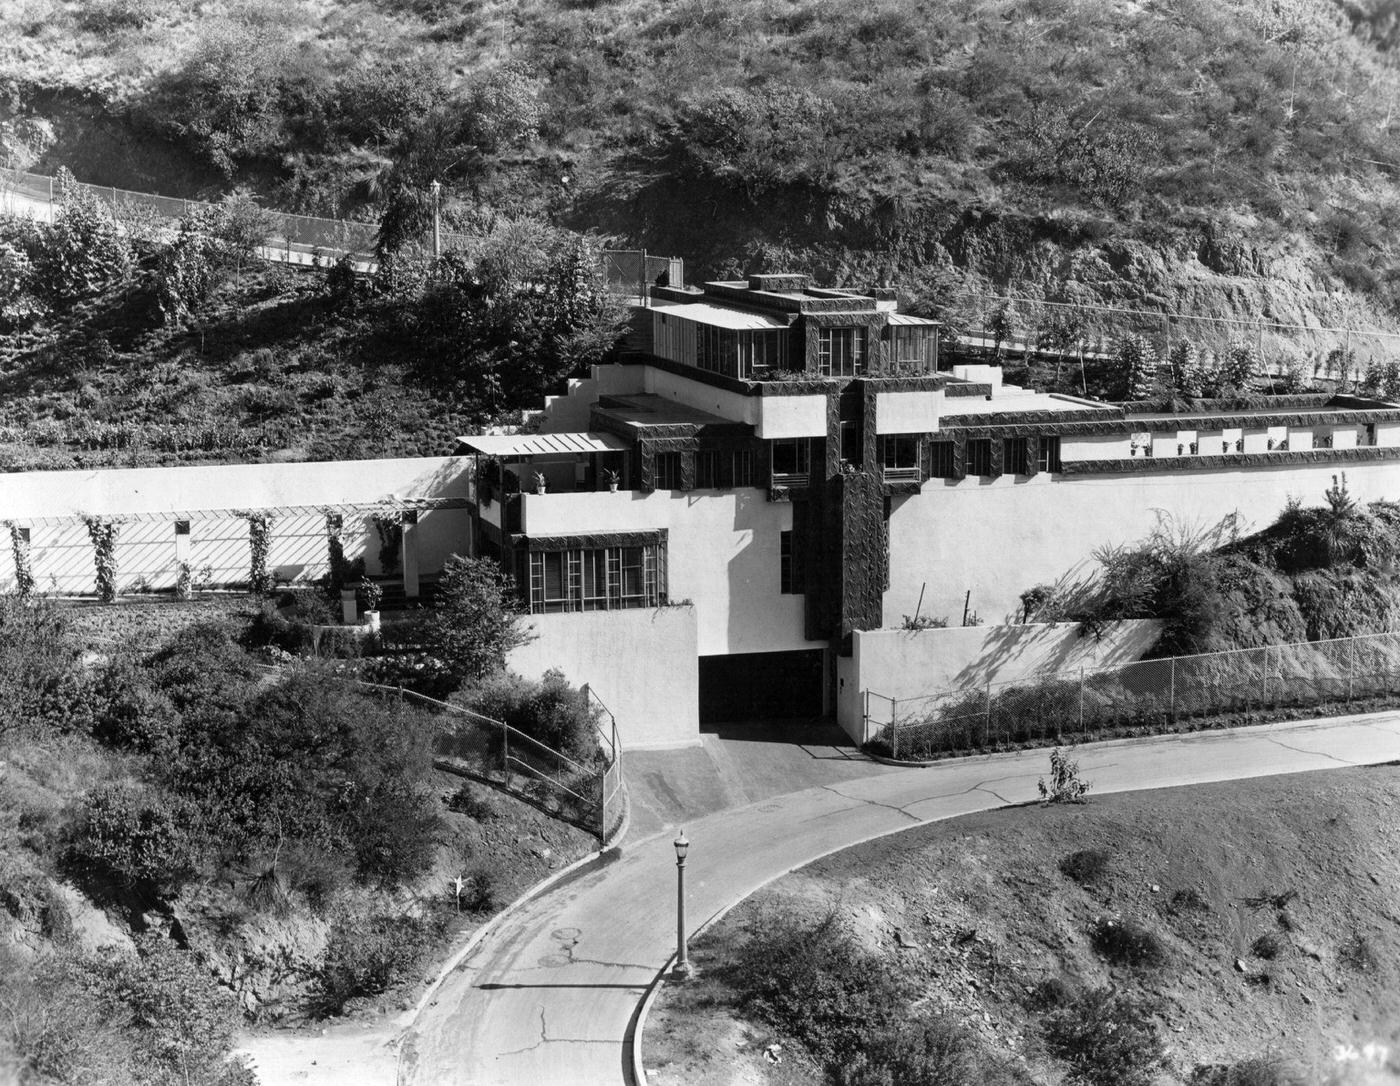 An exterior view of the home of Ramon Novarro, the Metro Goldwyn Mayer star, designed by Ramon Novarro himself, situated in the hills overlooking Los Angeles, 1930.